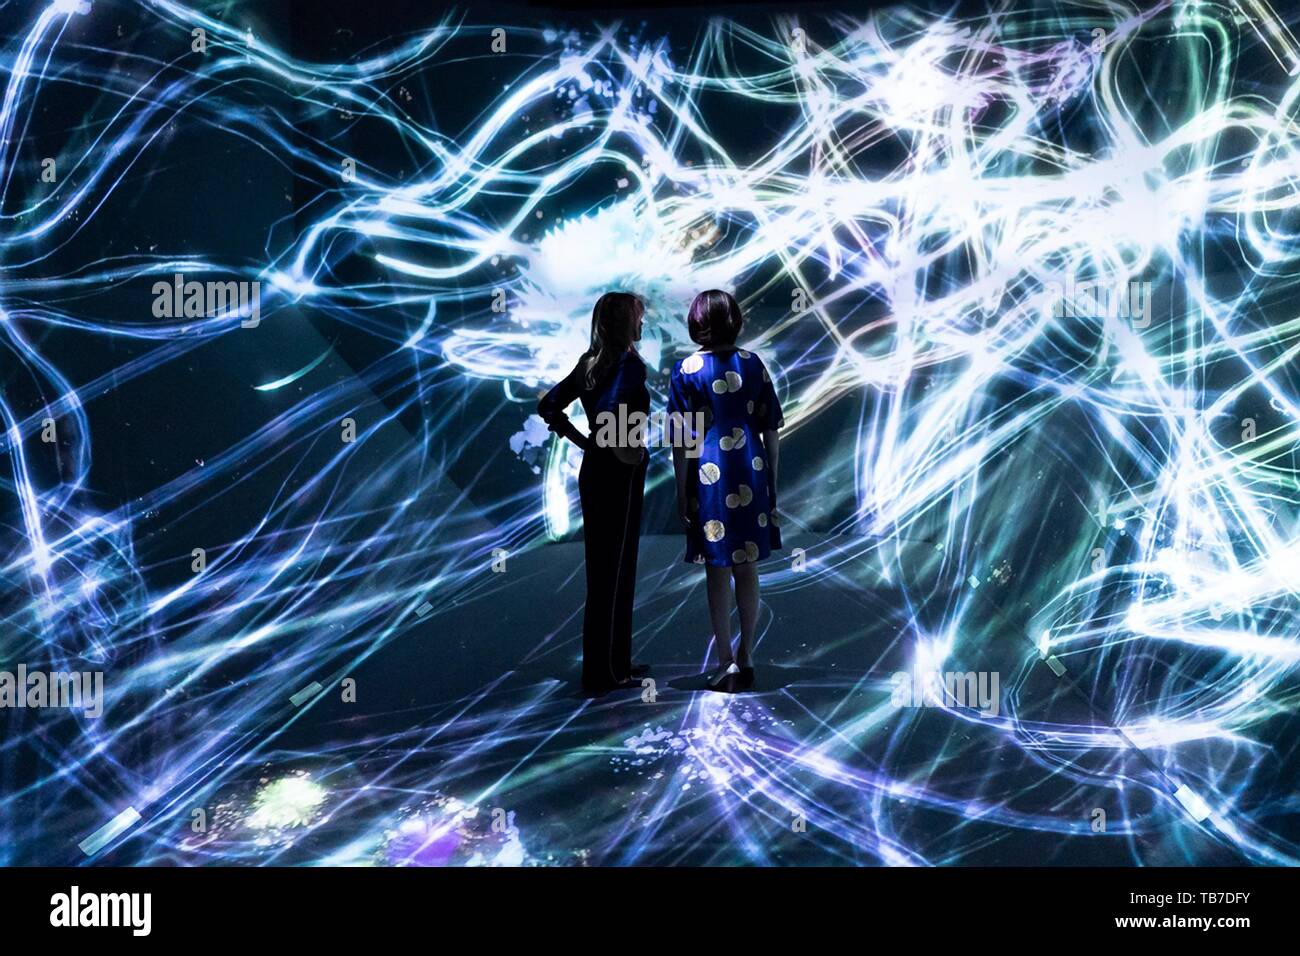 U.S. First Lady Melania Trump, left, and Akie Abe, wife of Japanese Prime Minister Shinzo Abe, tour the Borderless Exhibit at the Mori Building Digital Art Museum May 26, 2019 in Tokyo, Japan. Stock Photo